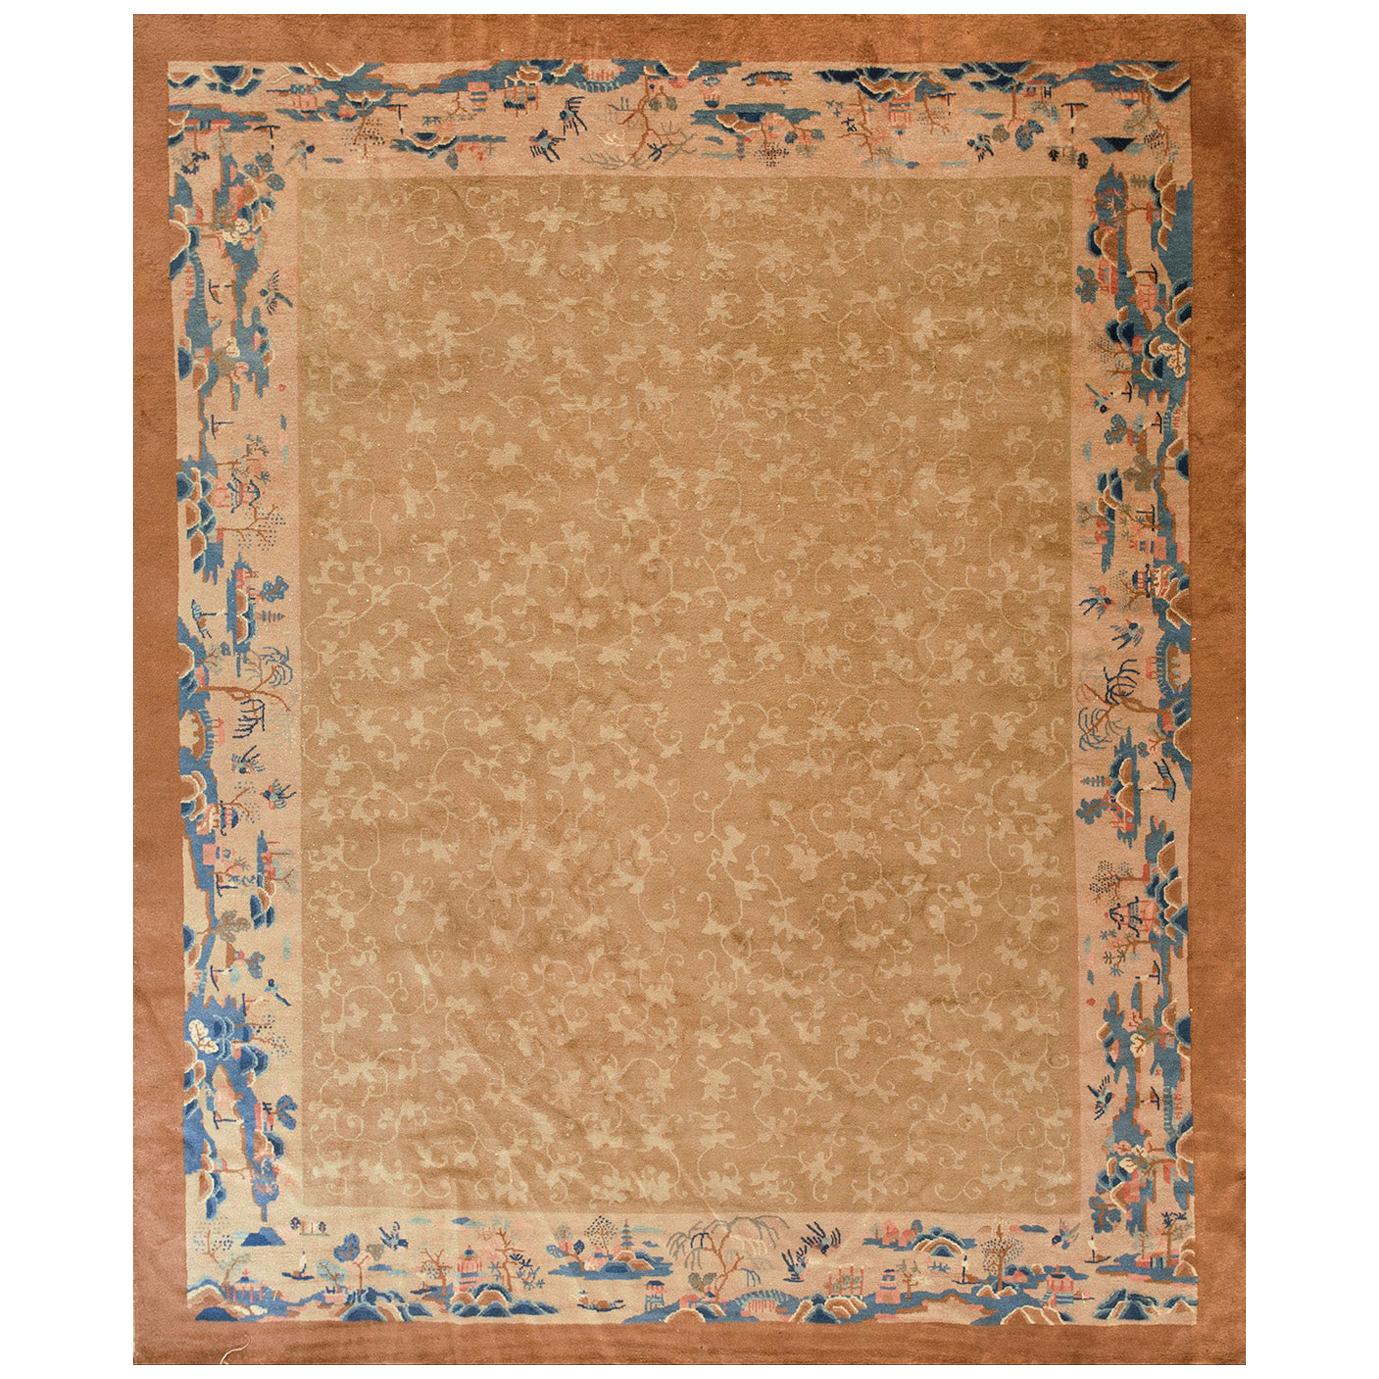 Early 20th Century Chinese Peking Carpet ( 8' x 9'10" - 245 x 300 ) For Sale